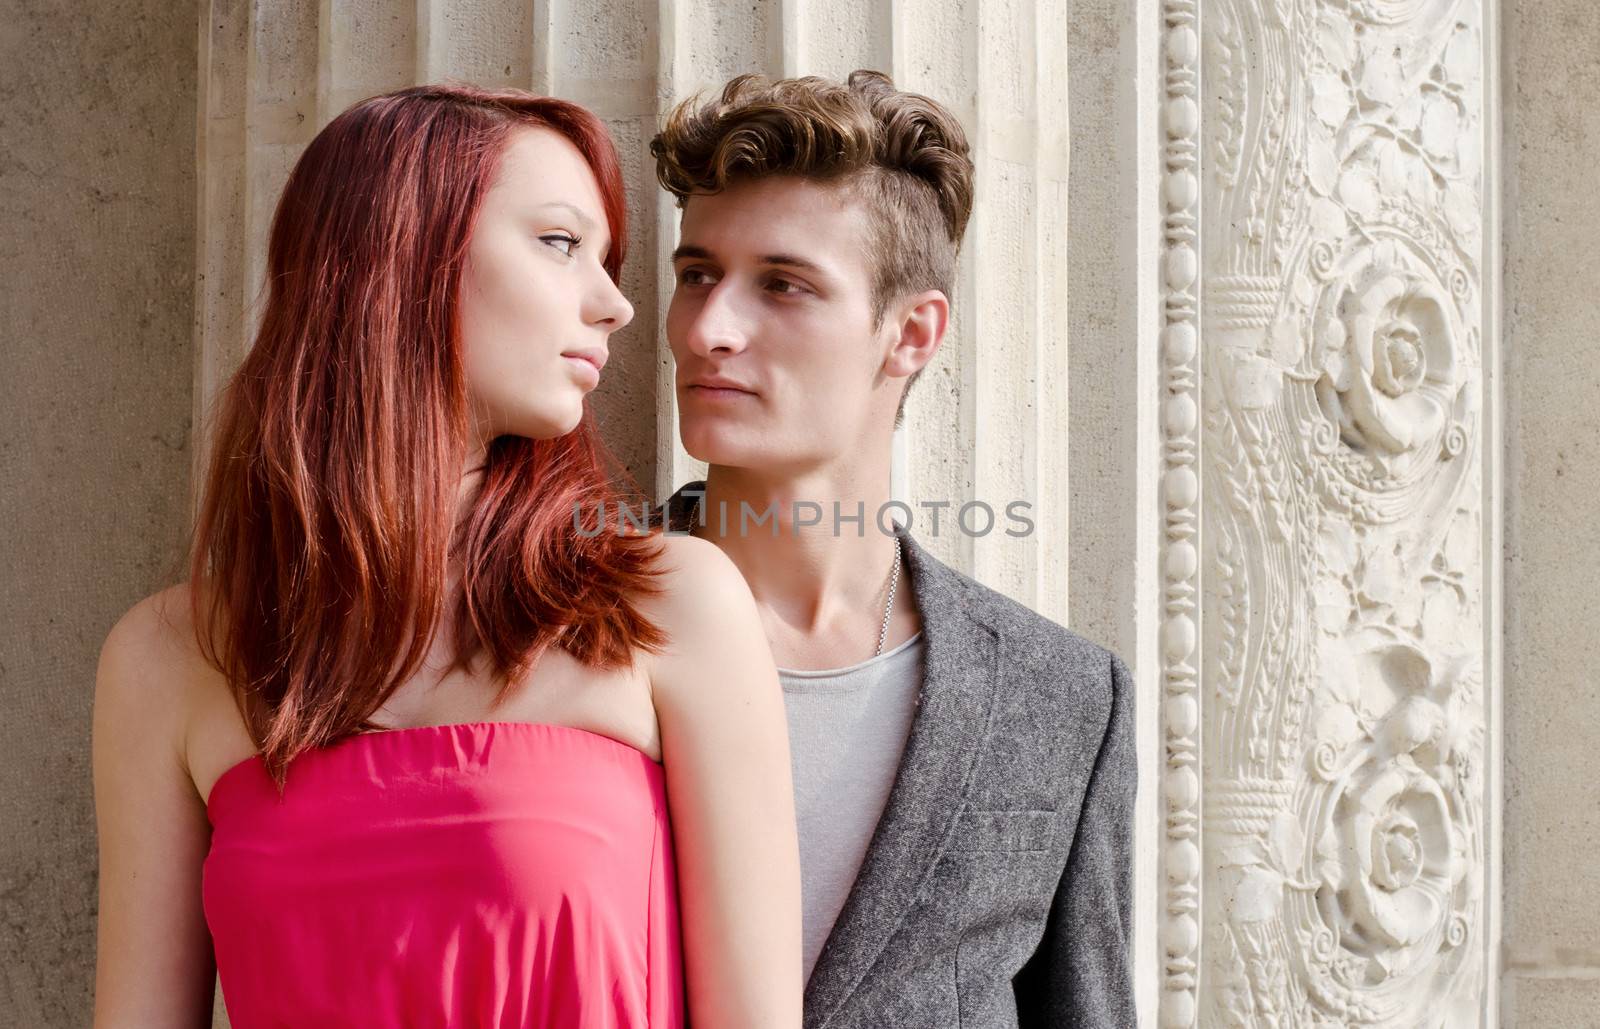 Elegant young couple standing in front of old stone column looking at each other